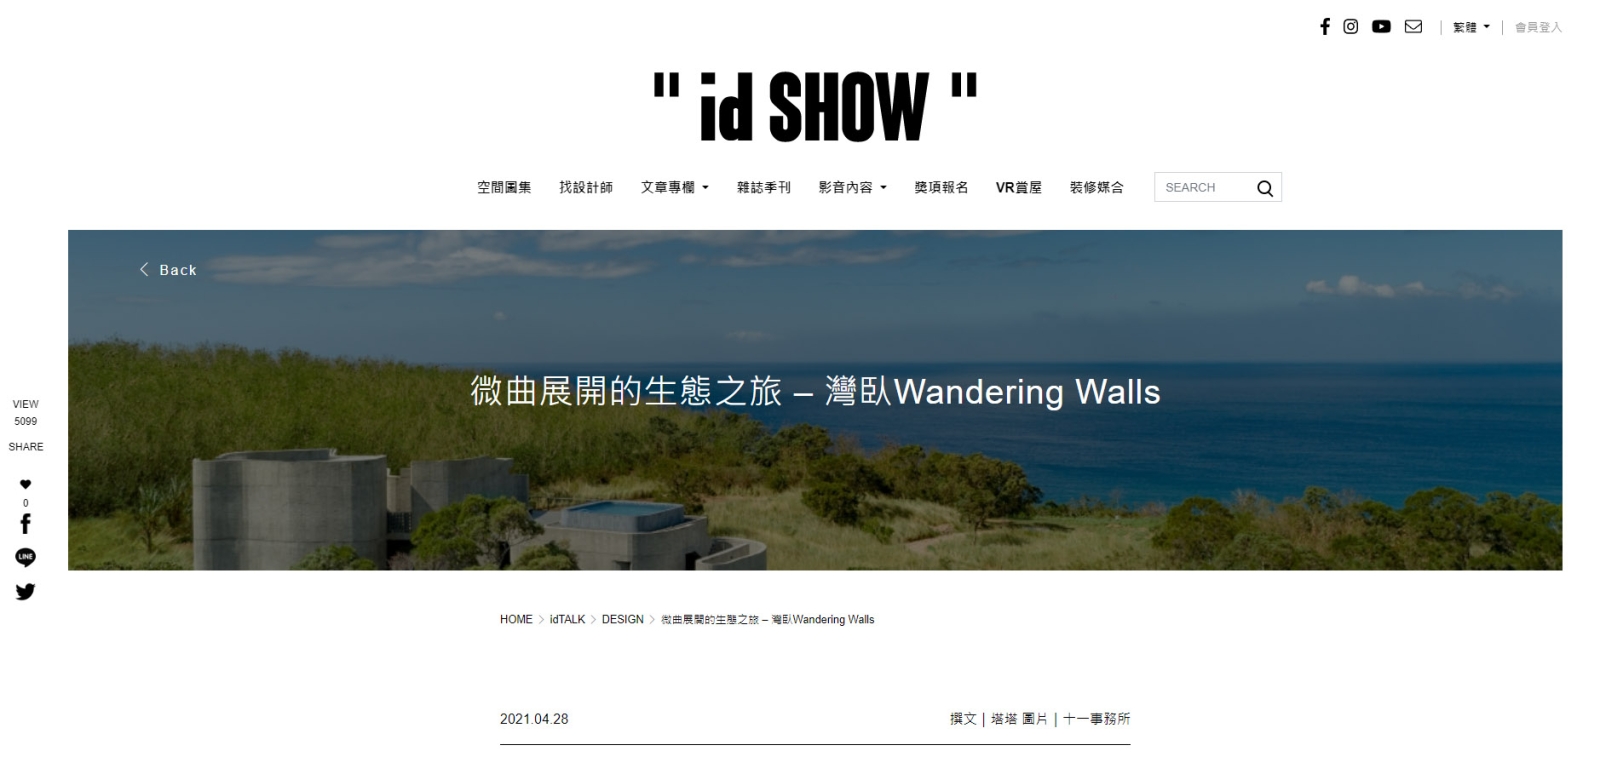 The website id SHOW reported the Wandering Walls